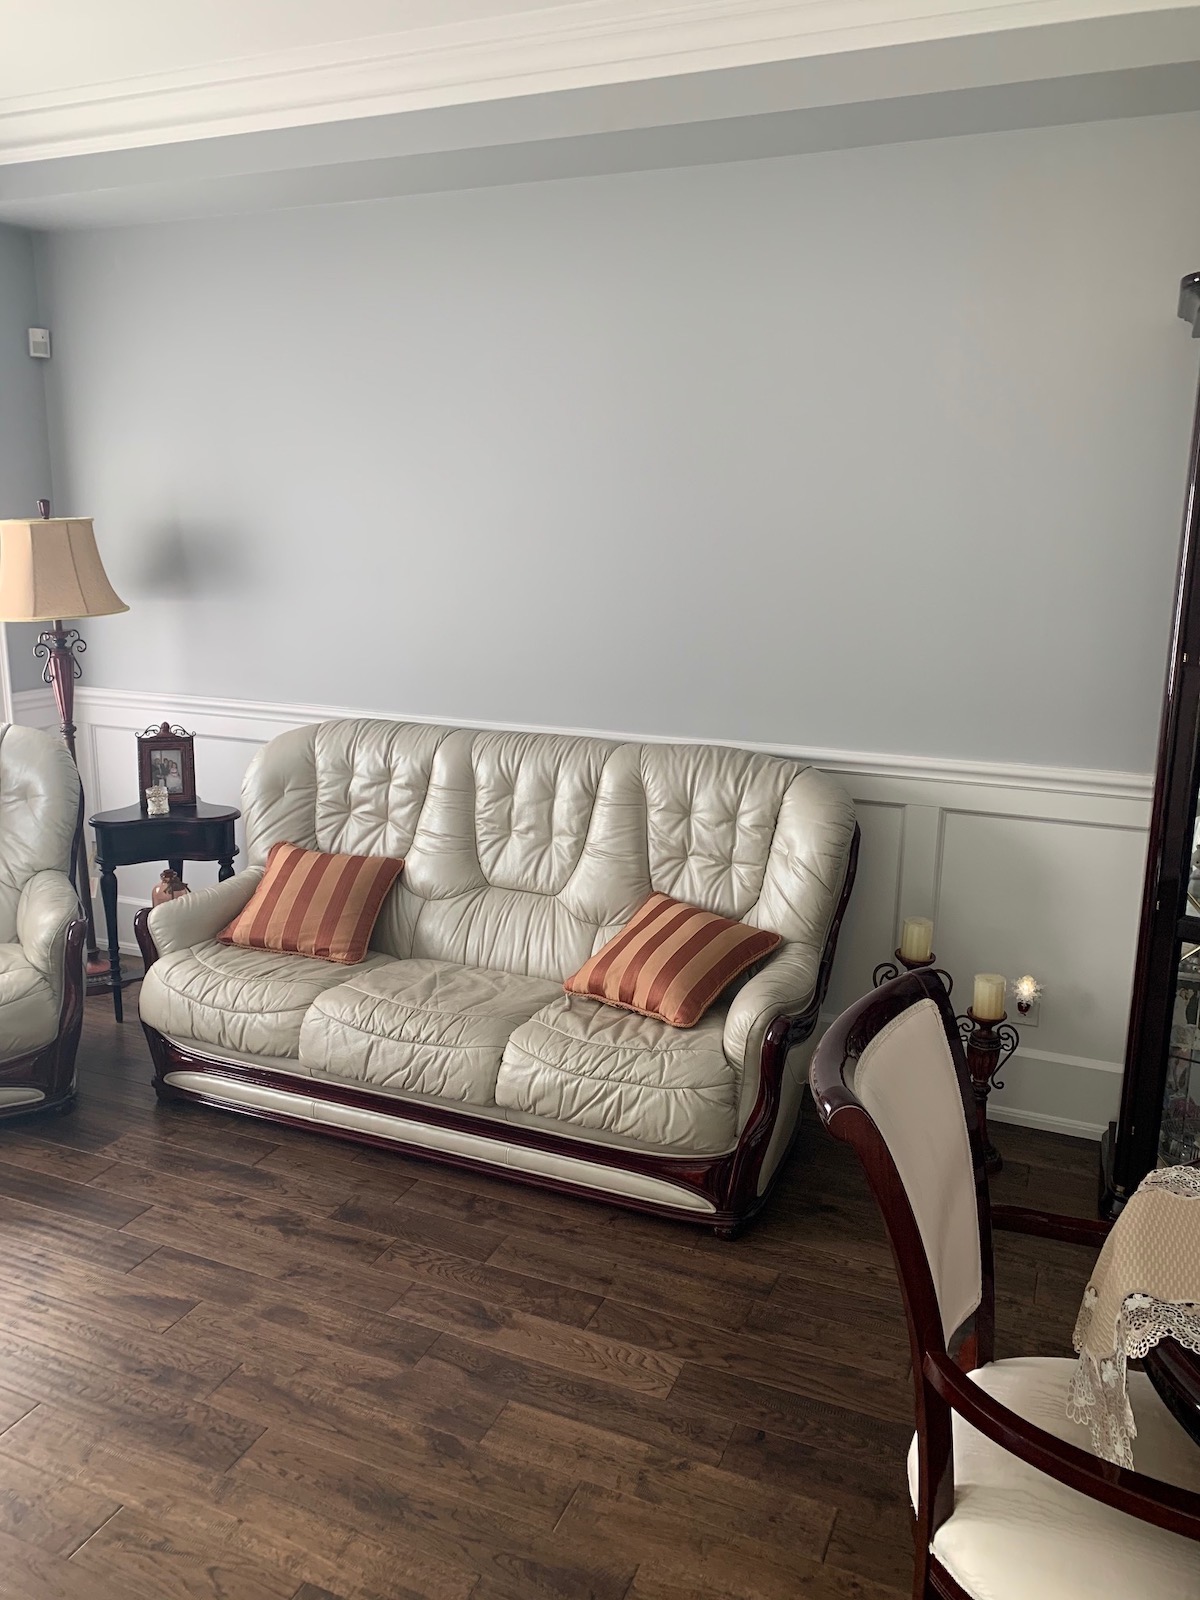 Painted wall panelled wainscoting in living room